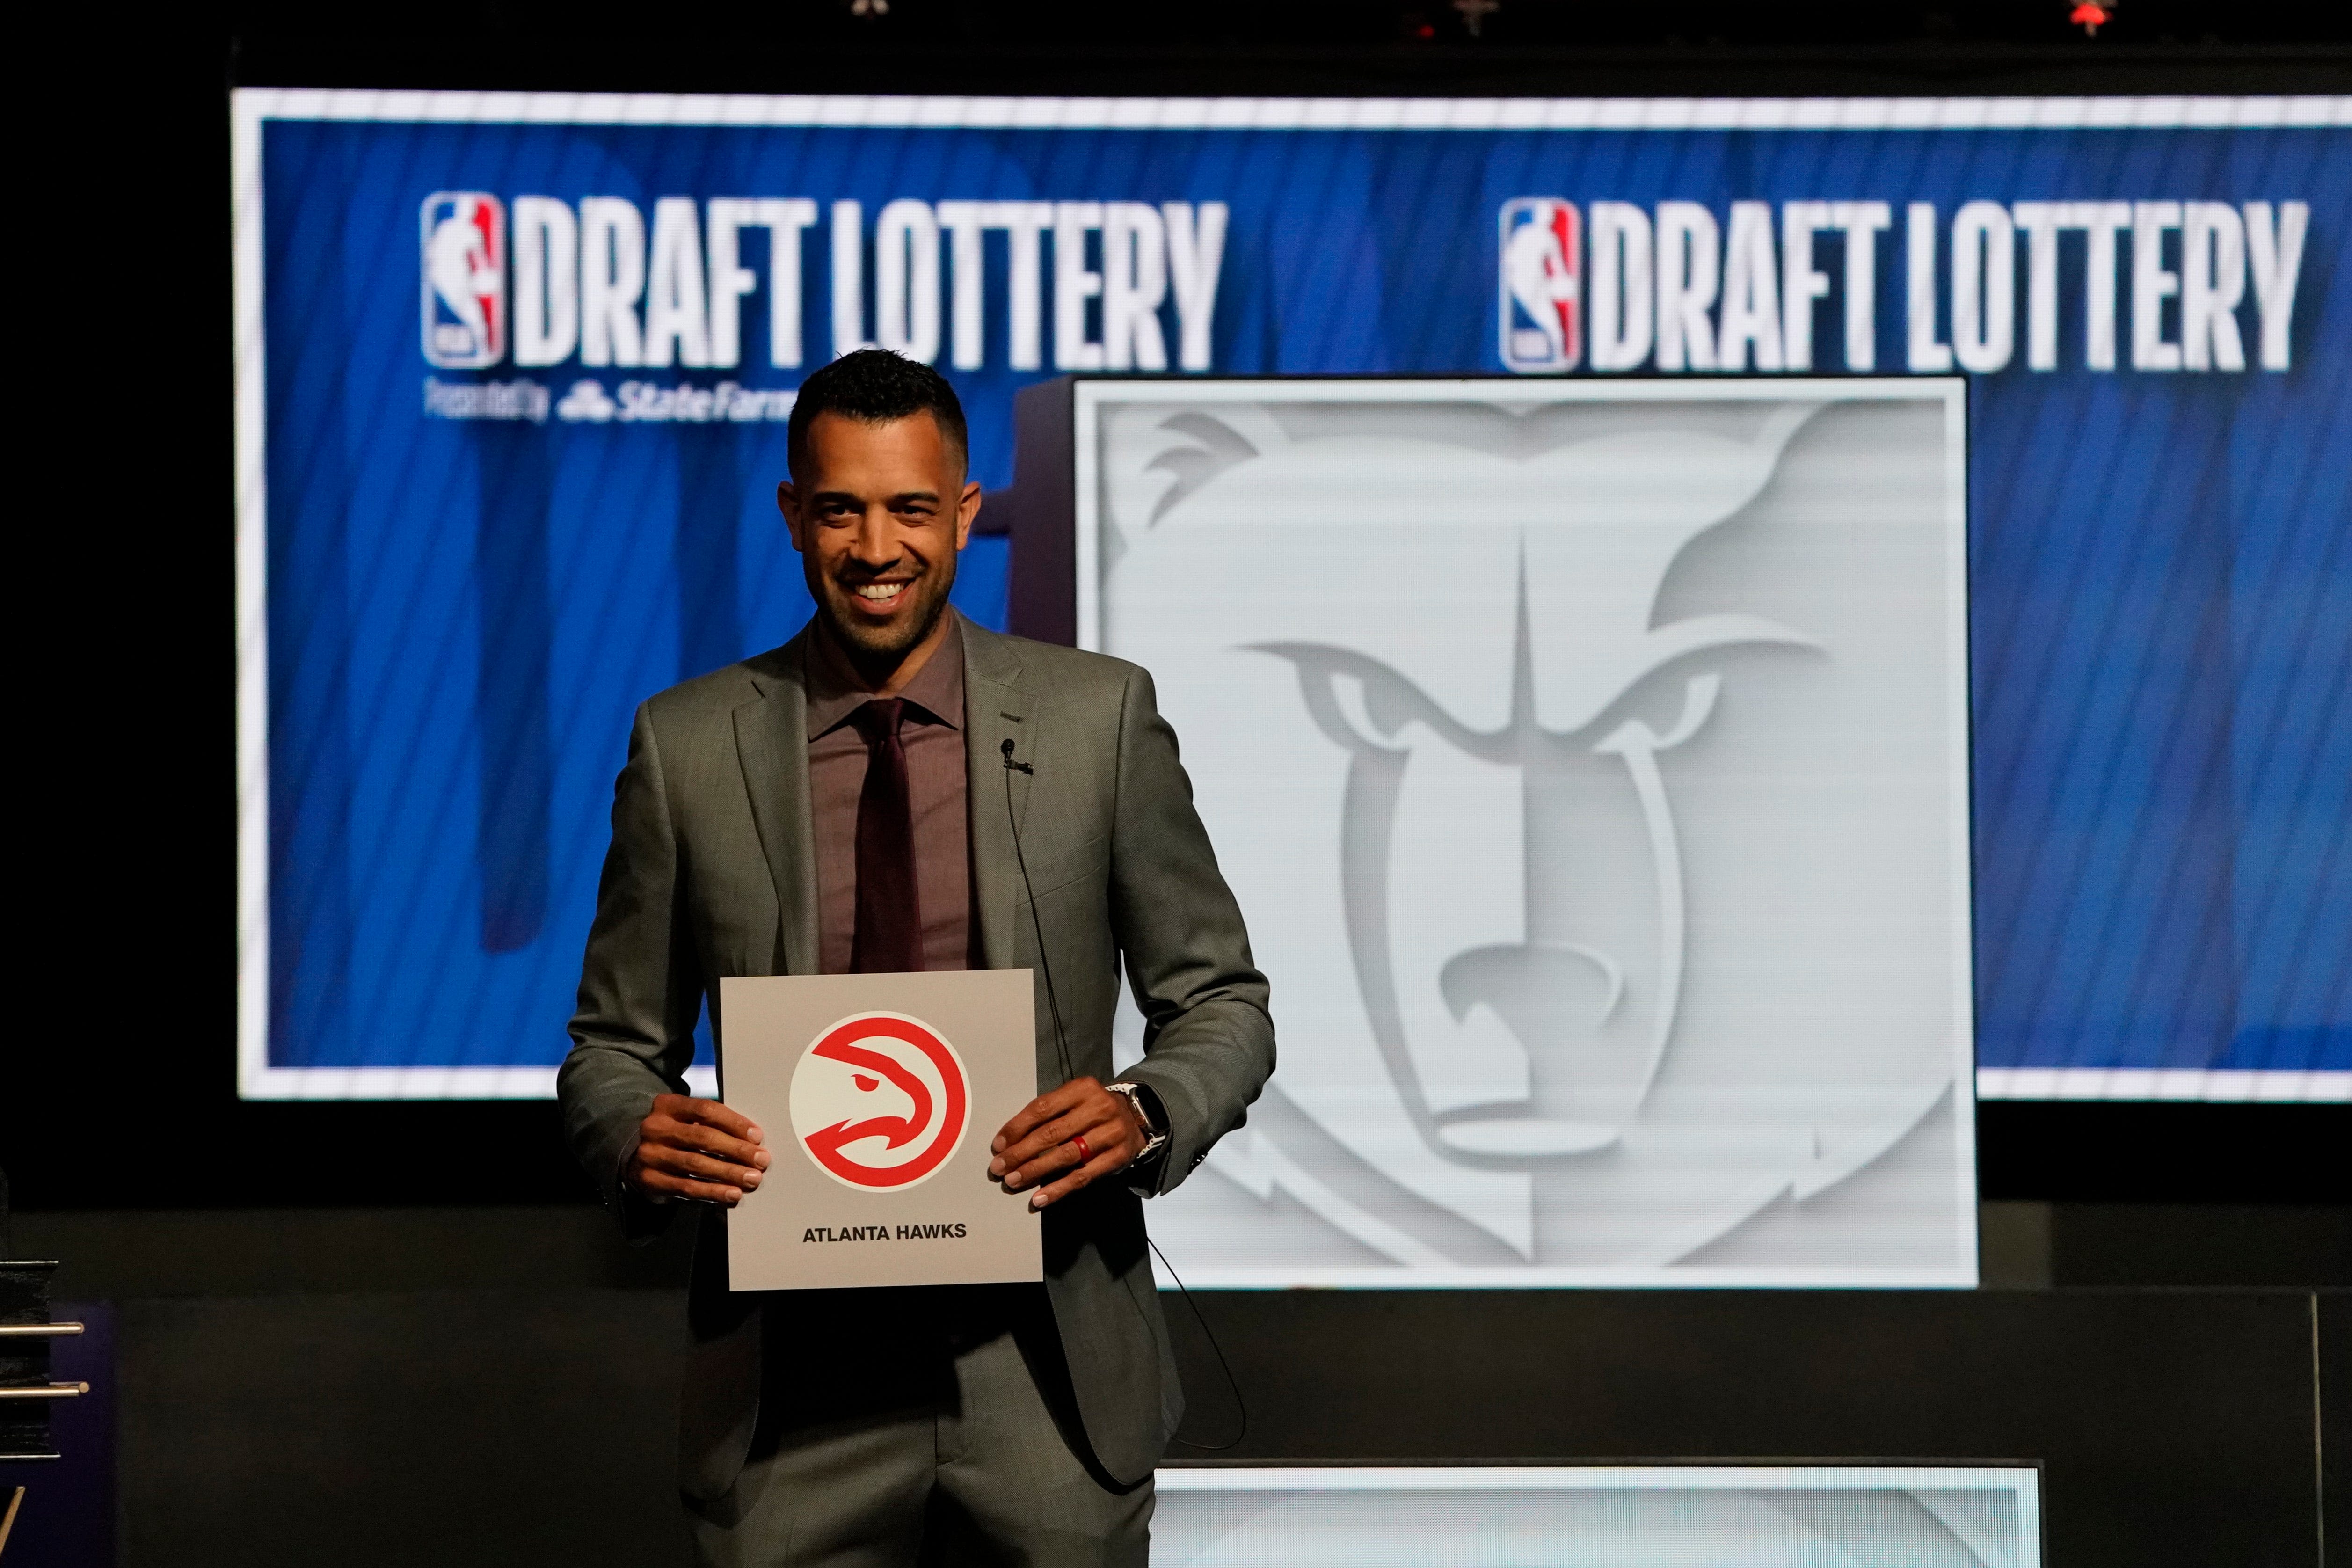 NBA draft lottery didn't go Memphis Grizzlies' way. I hope they trade the pick | Giannotto